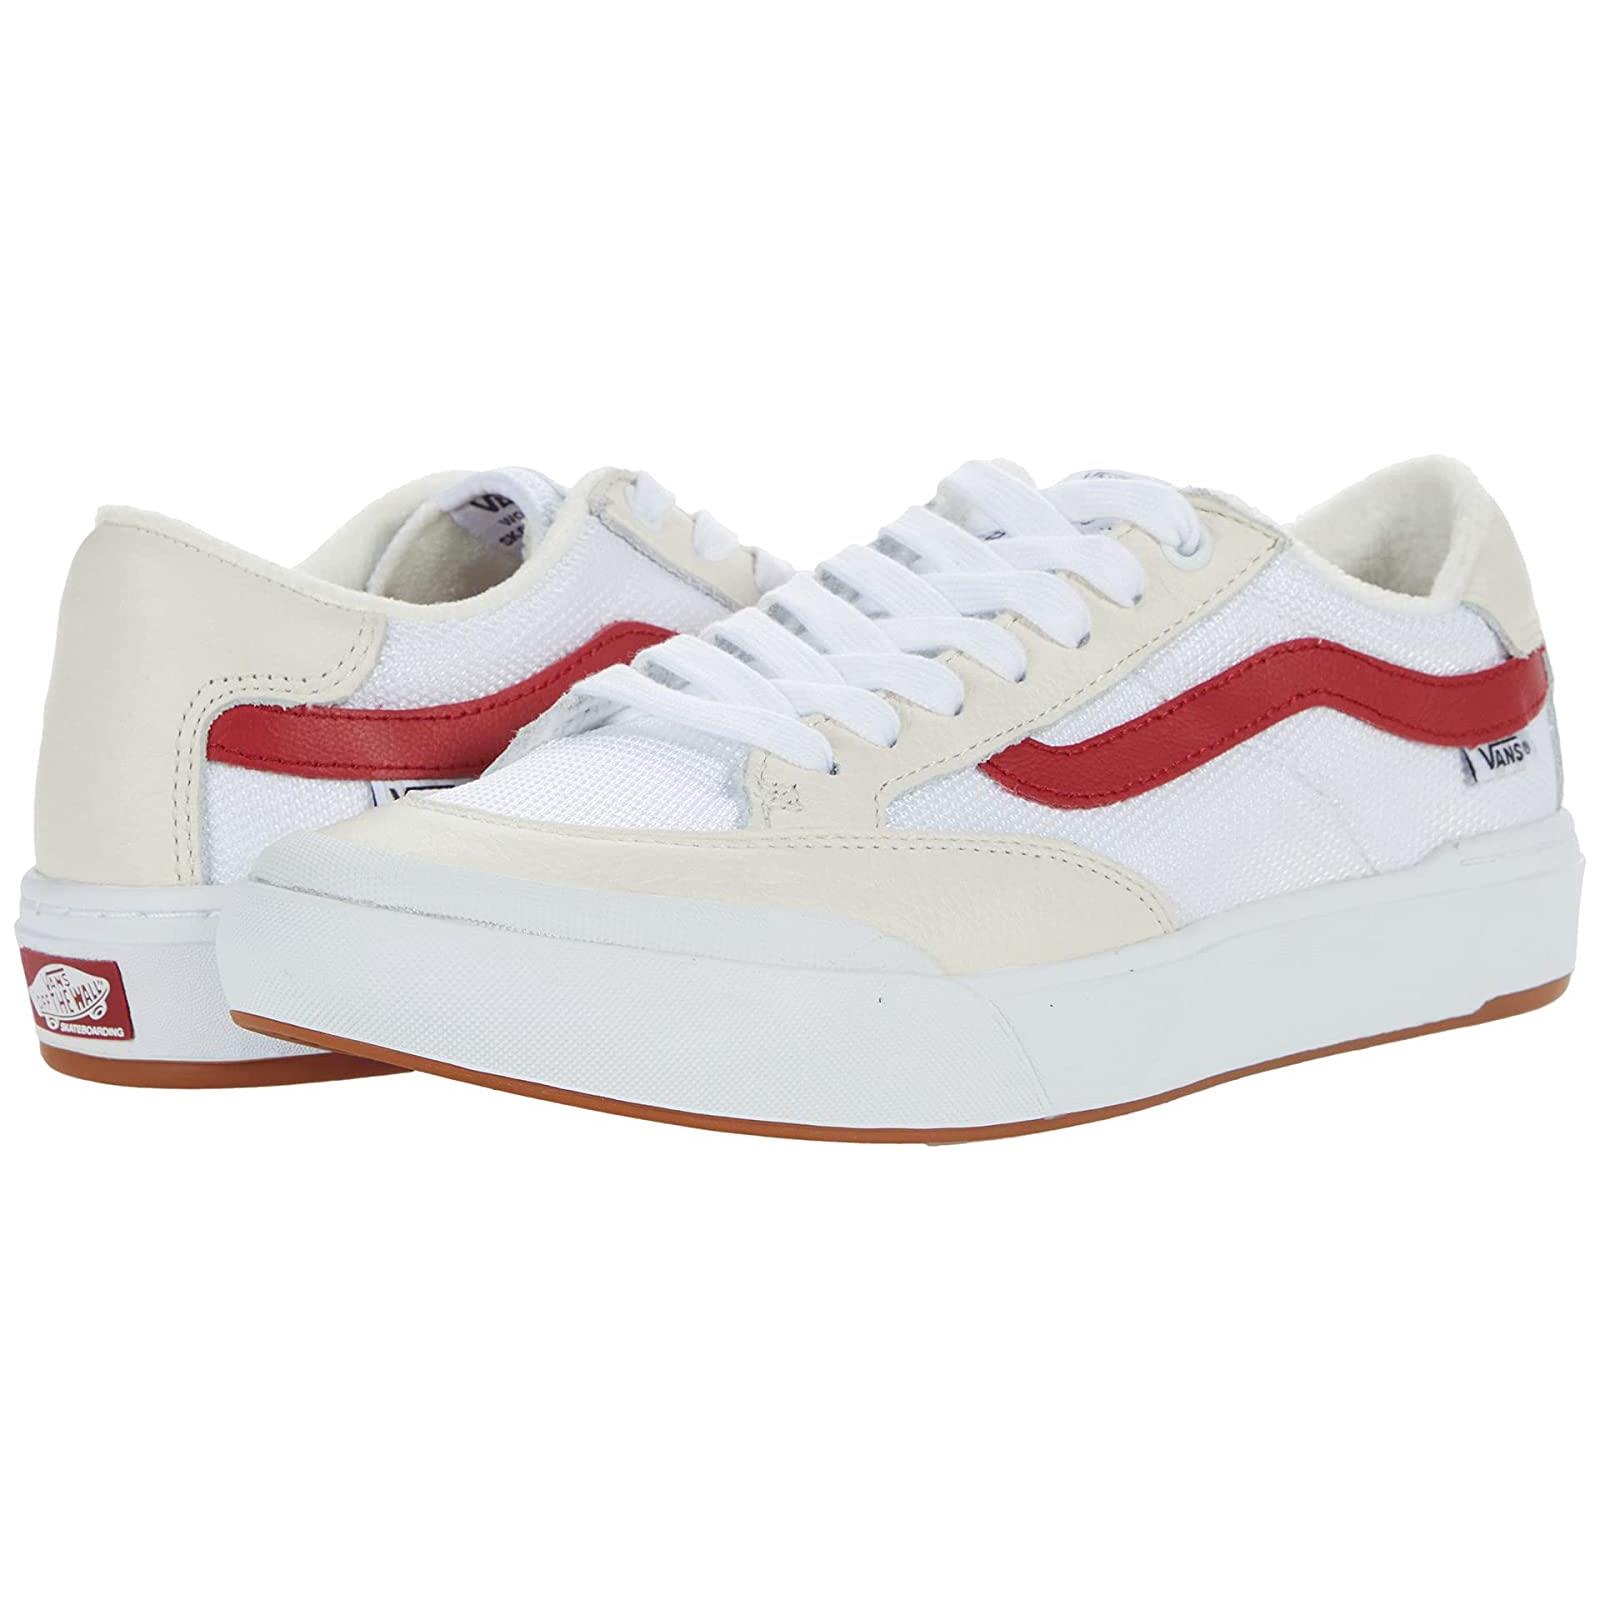 Man`s Sneakers Athletic Shoes Vans Berle (Sport VTG) White/Chili Pepper Leather